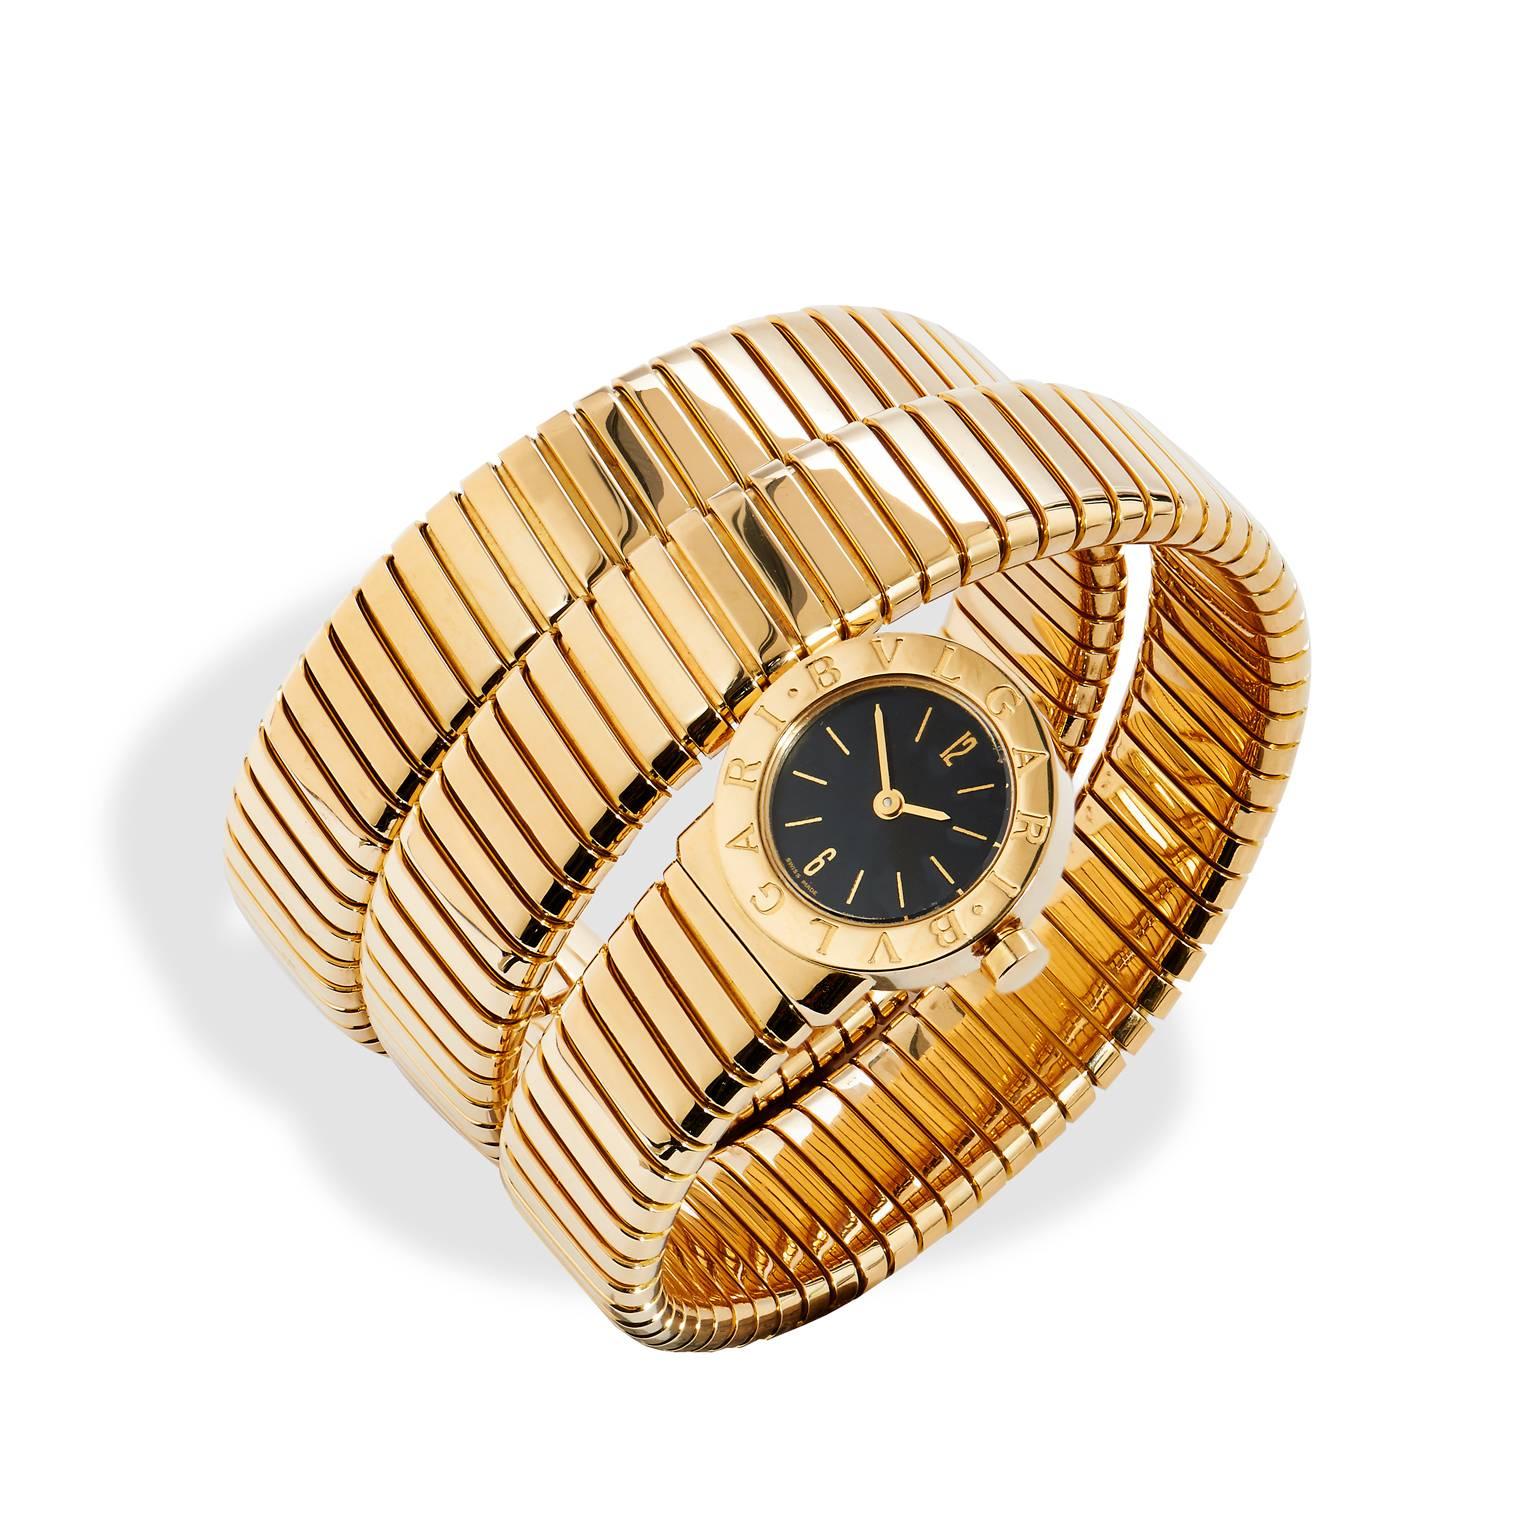 This Bvlgari Tubogas watch  is a cosmopolitan piece that mimics the sensual  movements of a snake with three 18kt yellow gold coils. This watch has a 19mm black dial and features Quartz movement. The piece is in mint condition and comes with box and